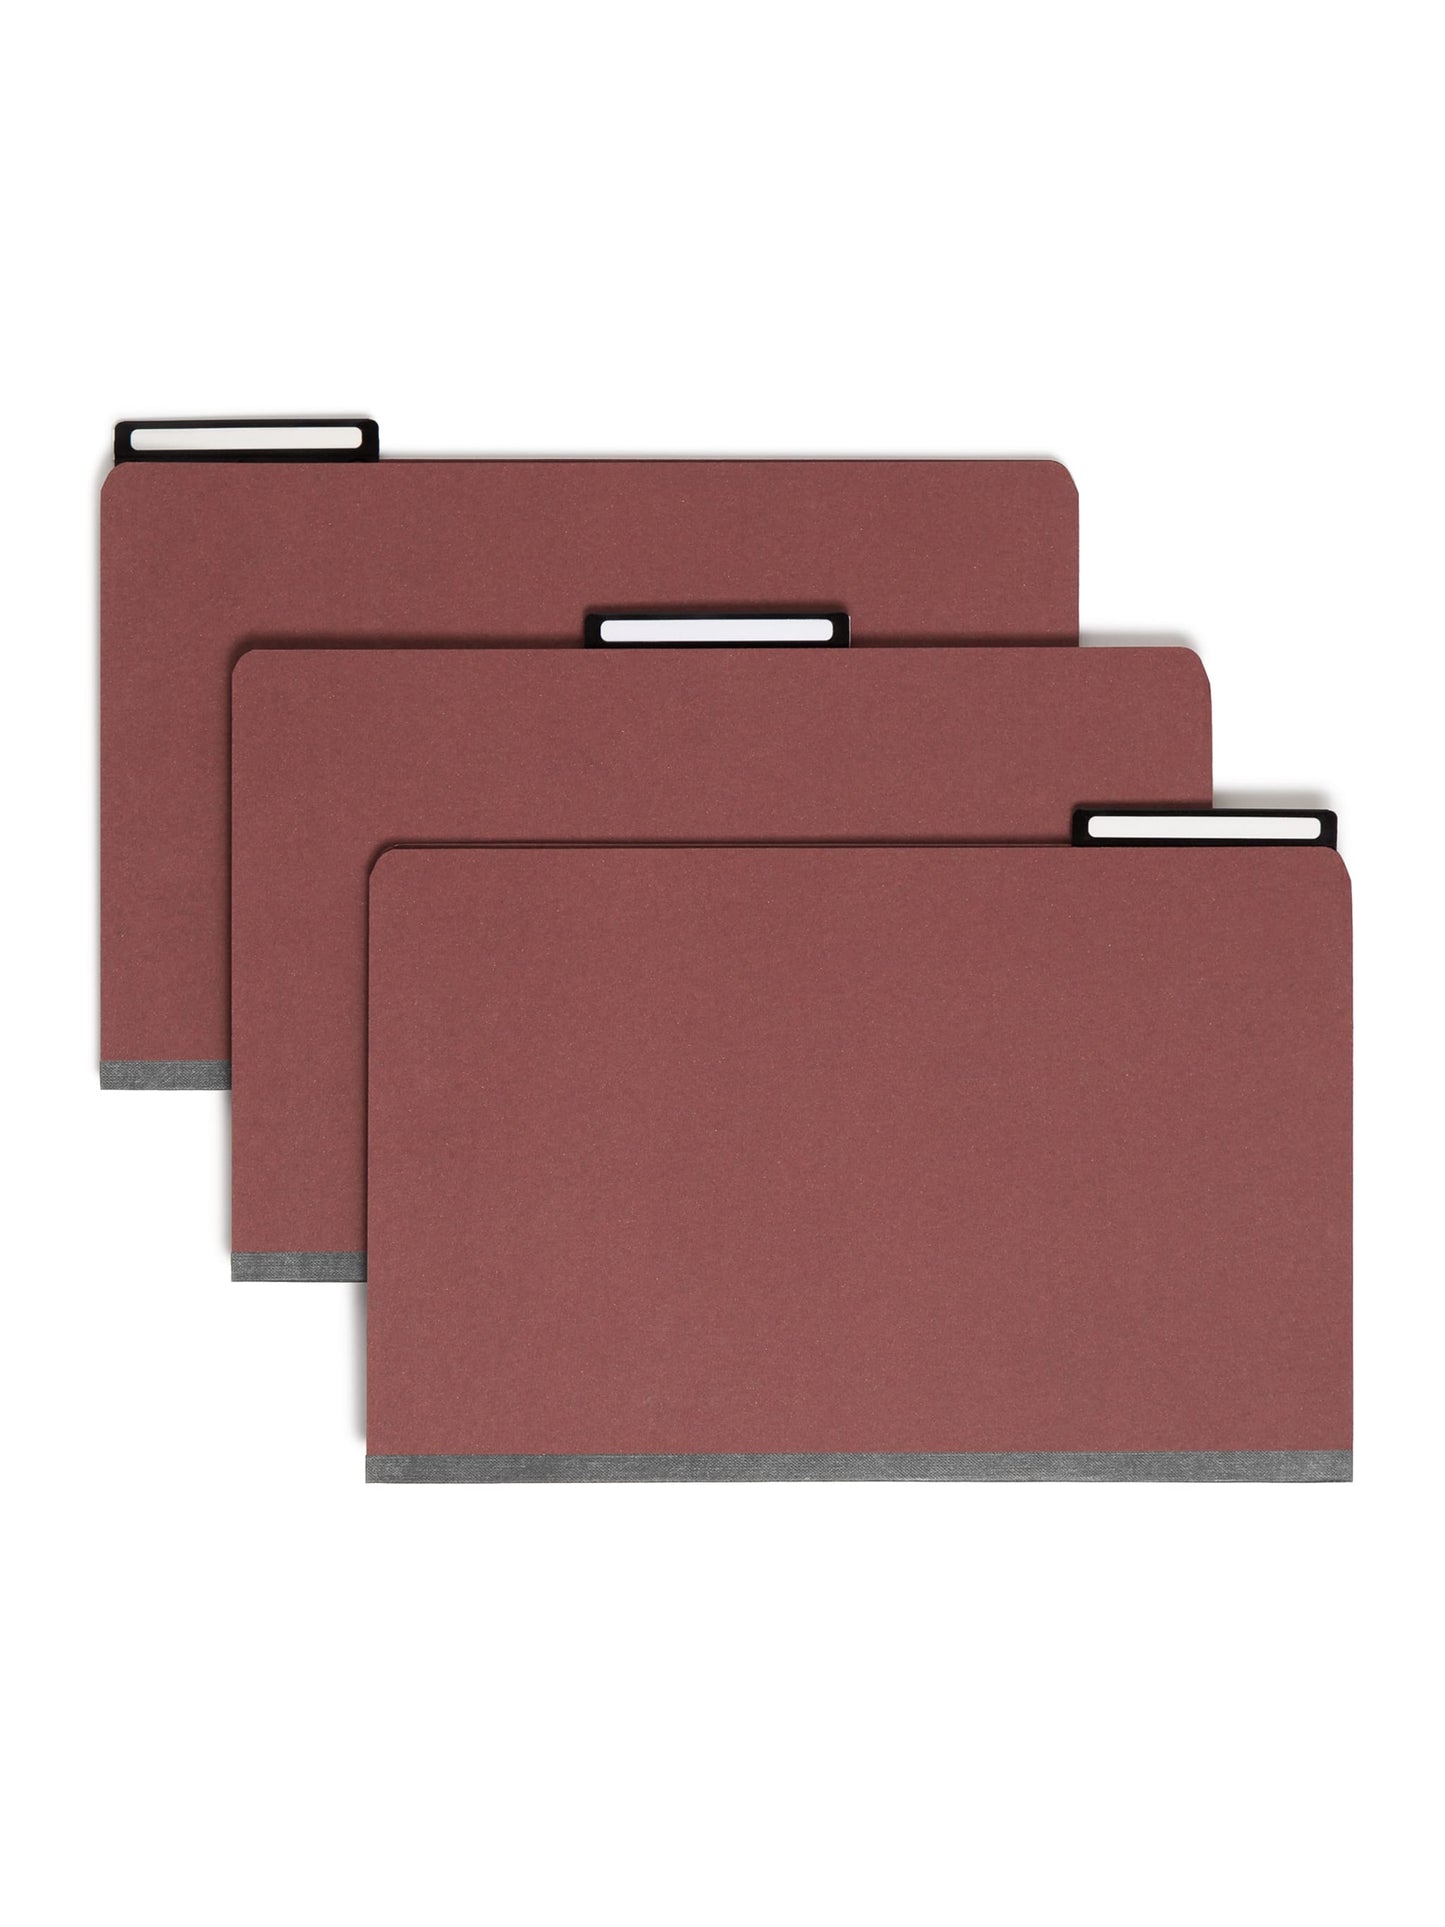 SafeSHIELD® Pressboard Classification File Folders, 2 Dividers, 2 inch Expansion, Metal Tab, Red Color, Legal Size, 